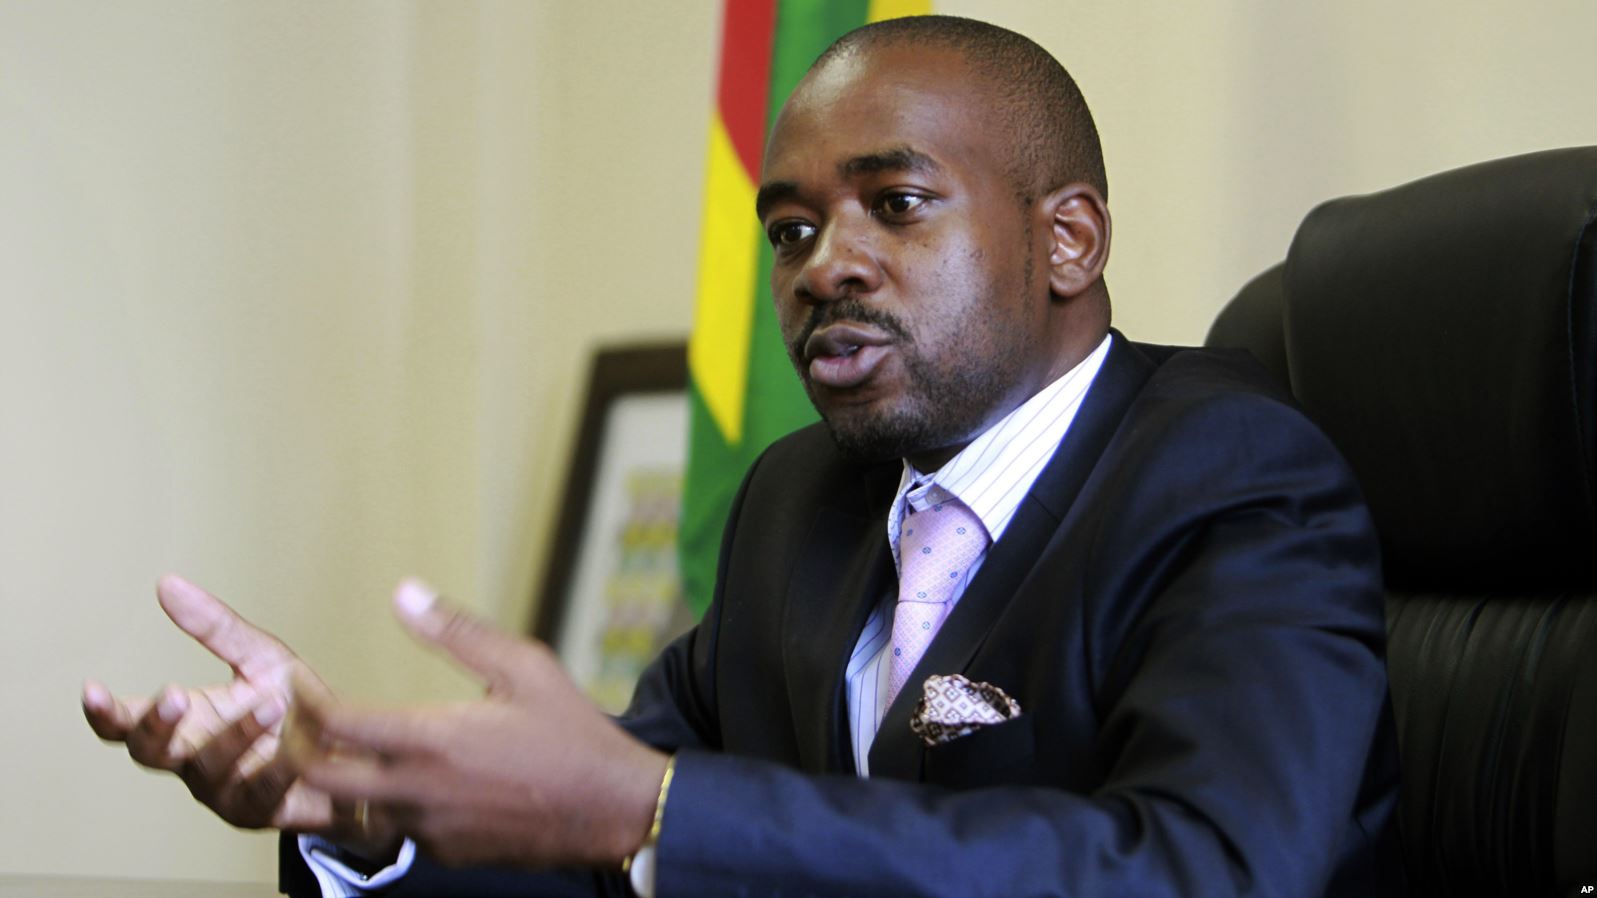 Chamisa should stick to written speeches